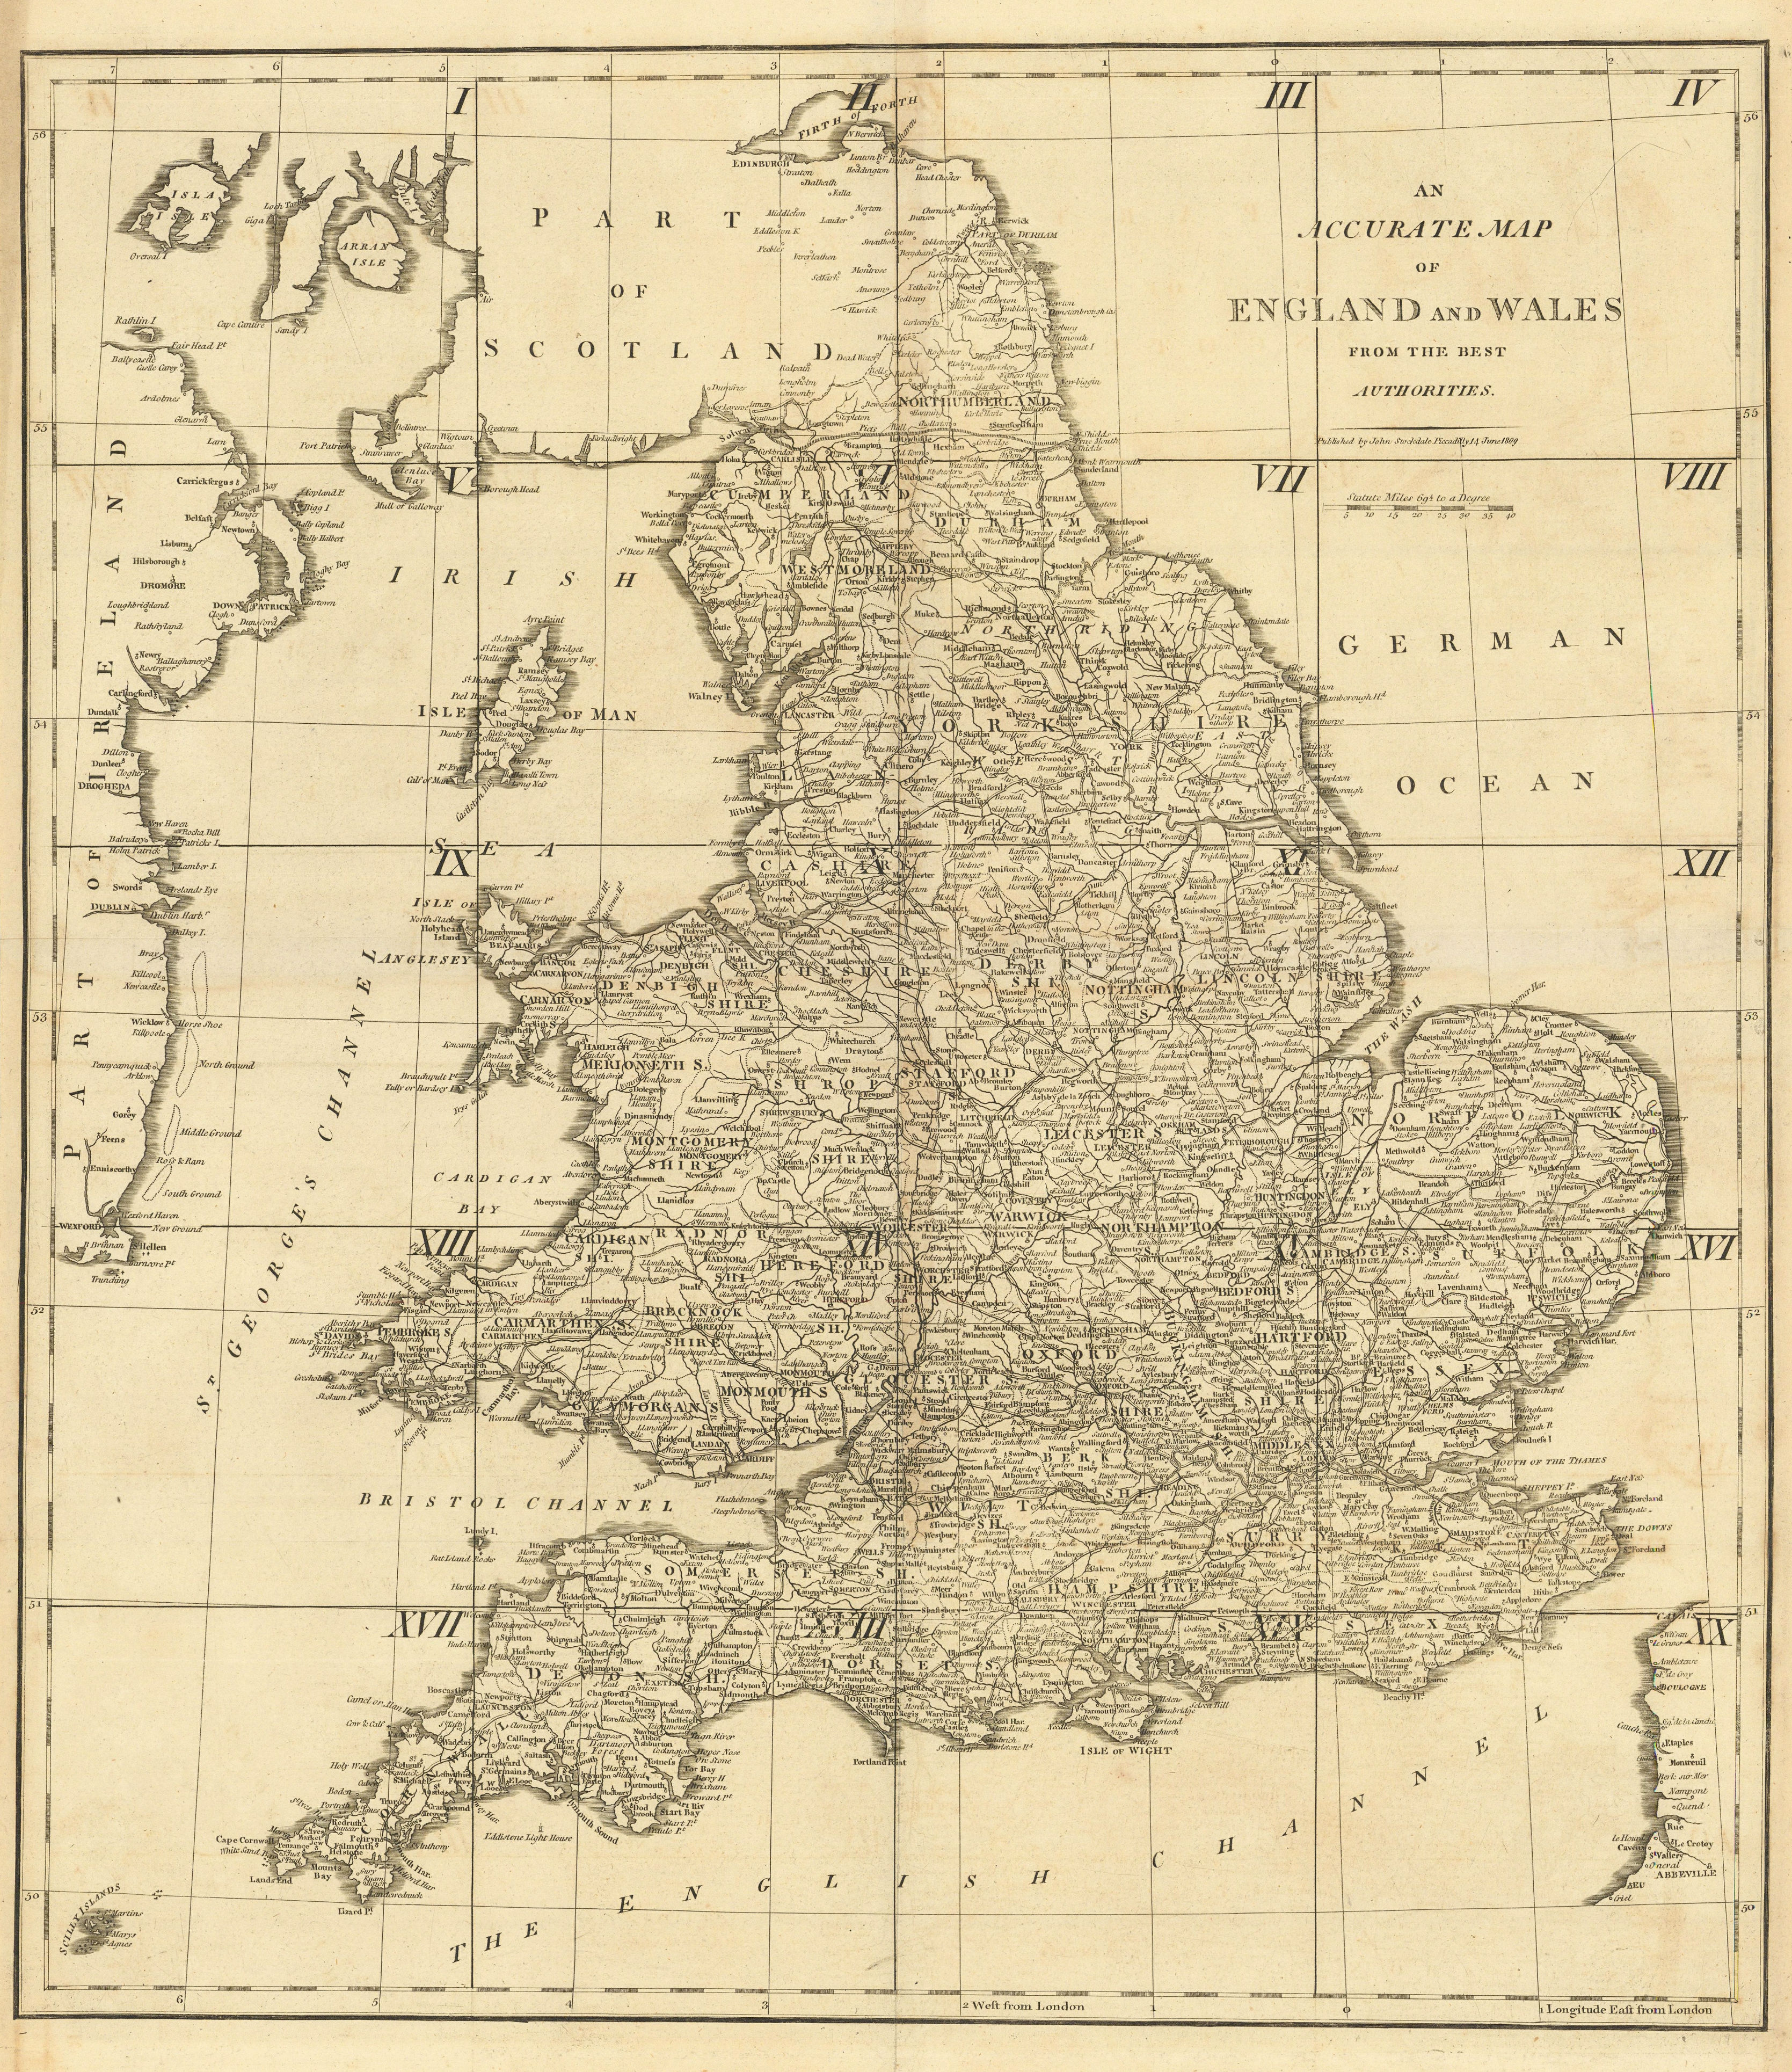 Associate Product "An accurate map of England and Wales from the best authorities". CARY 1806